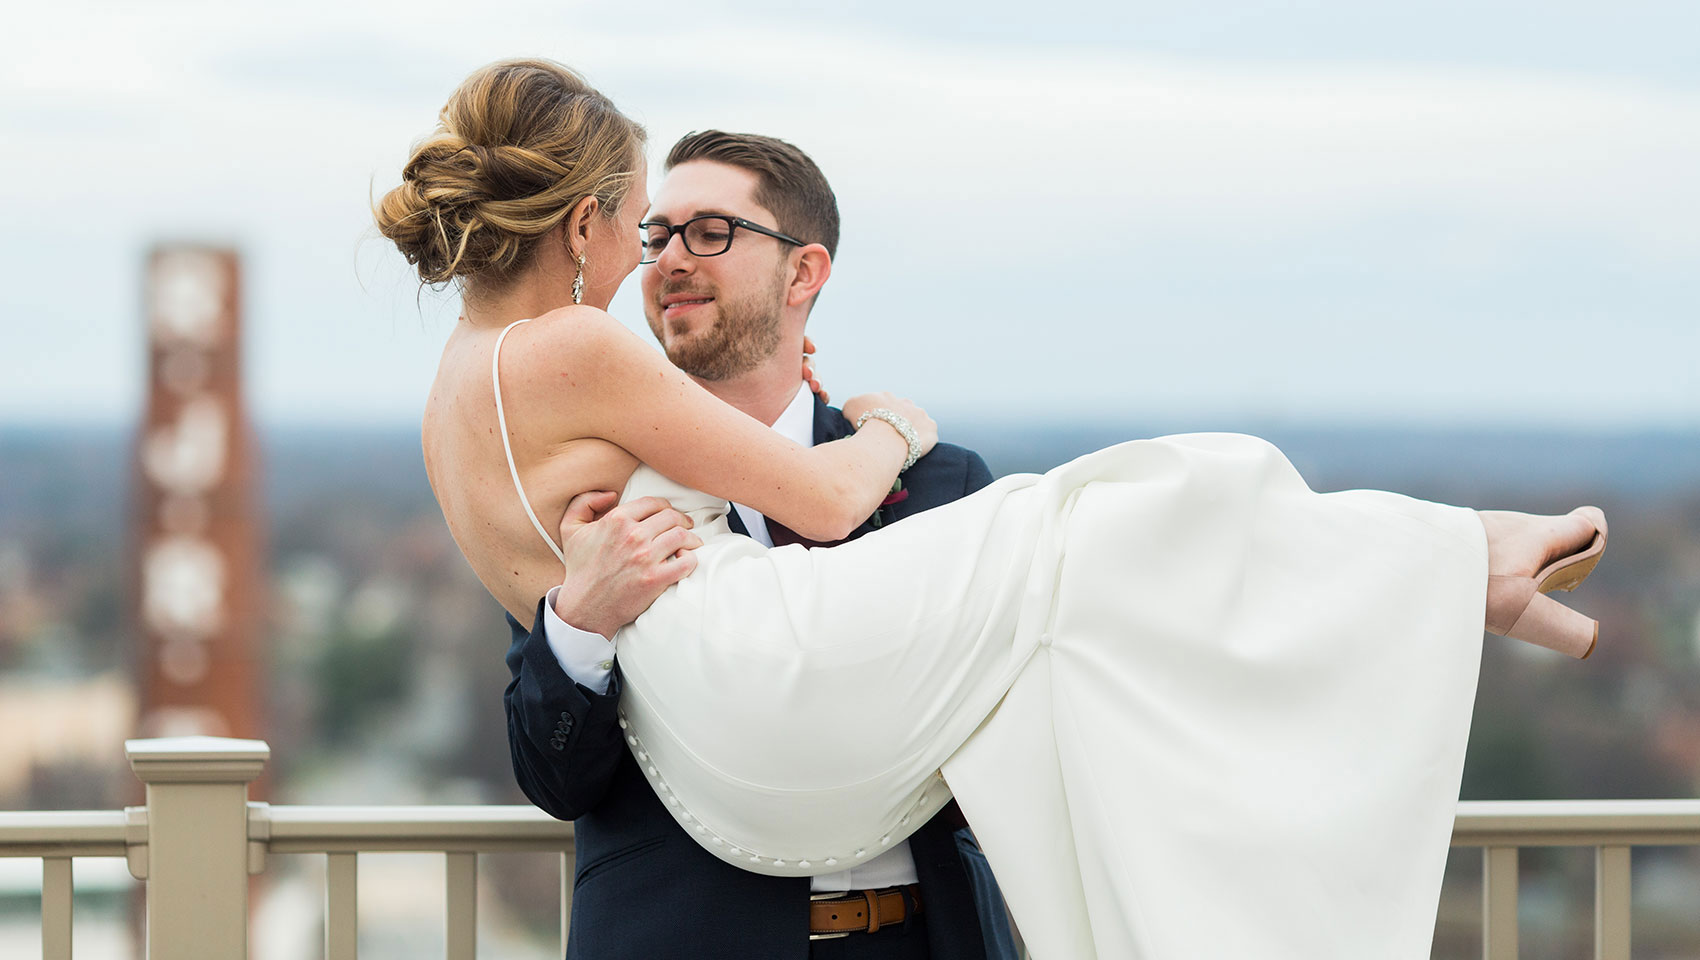 Bride in groom’s arms with Winston Salem in background